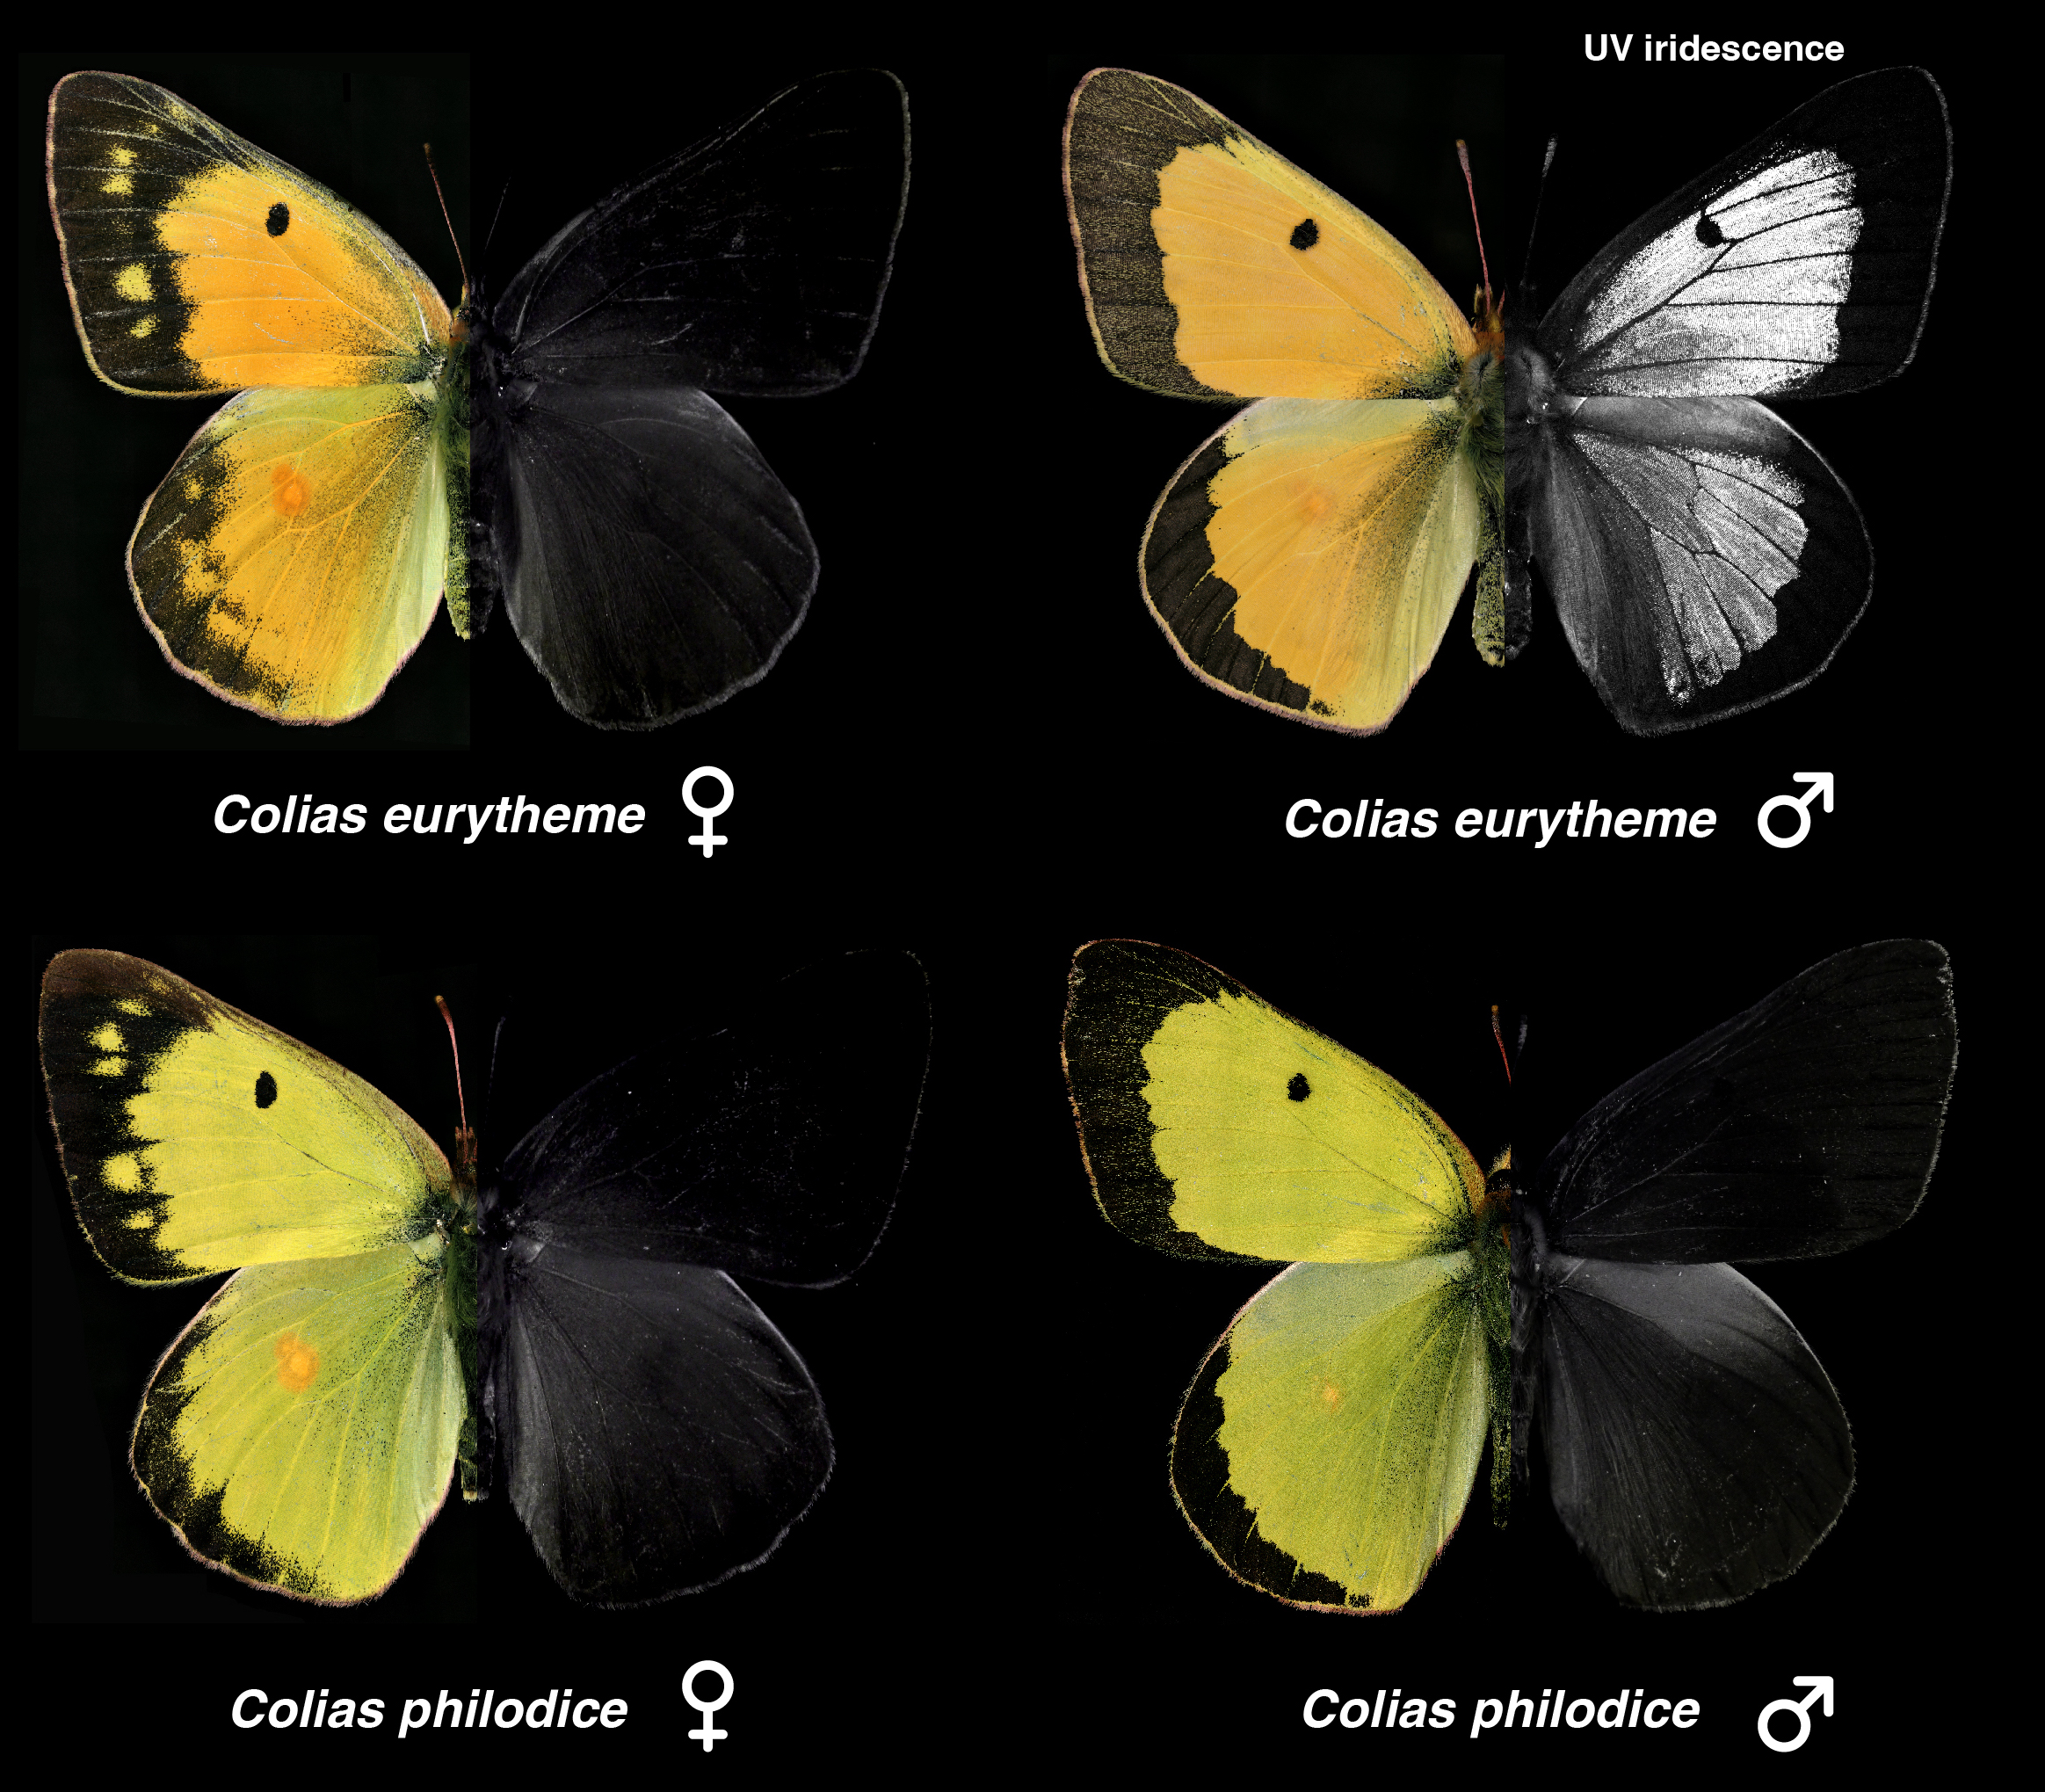 Info: The male species of the orange sulphur butterfly (Colias eurytheme, top right) is the only one to display UV iridescence in nature. The female of the same species (top left) and both the female and male of the clouded sulphur butterfly (Colias philodice, bottom left and right) do not display UV iridescence due to the presence of a speciation gene on a sex chromosome.  Credit: Vincent Ficarrotta and Arnaud Martin/ The George Washington University 